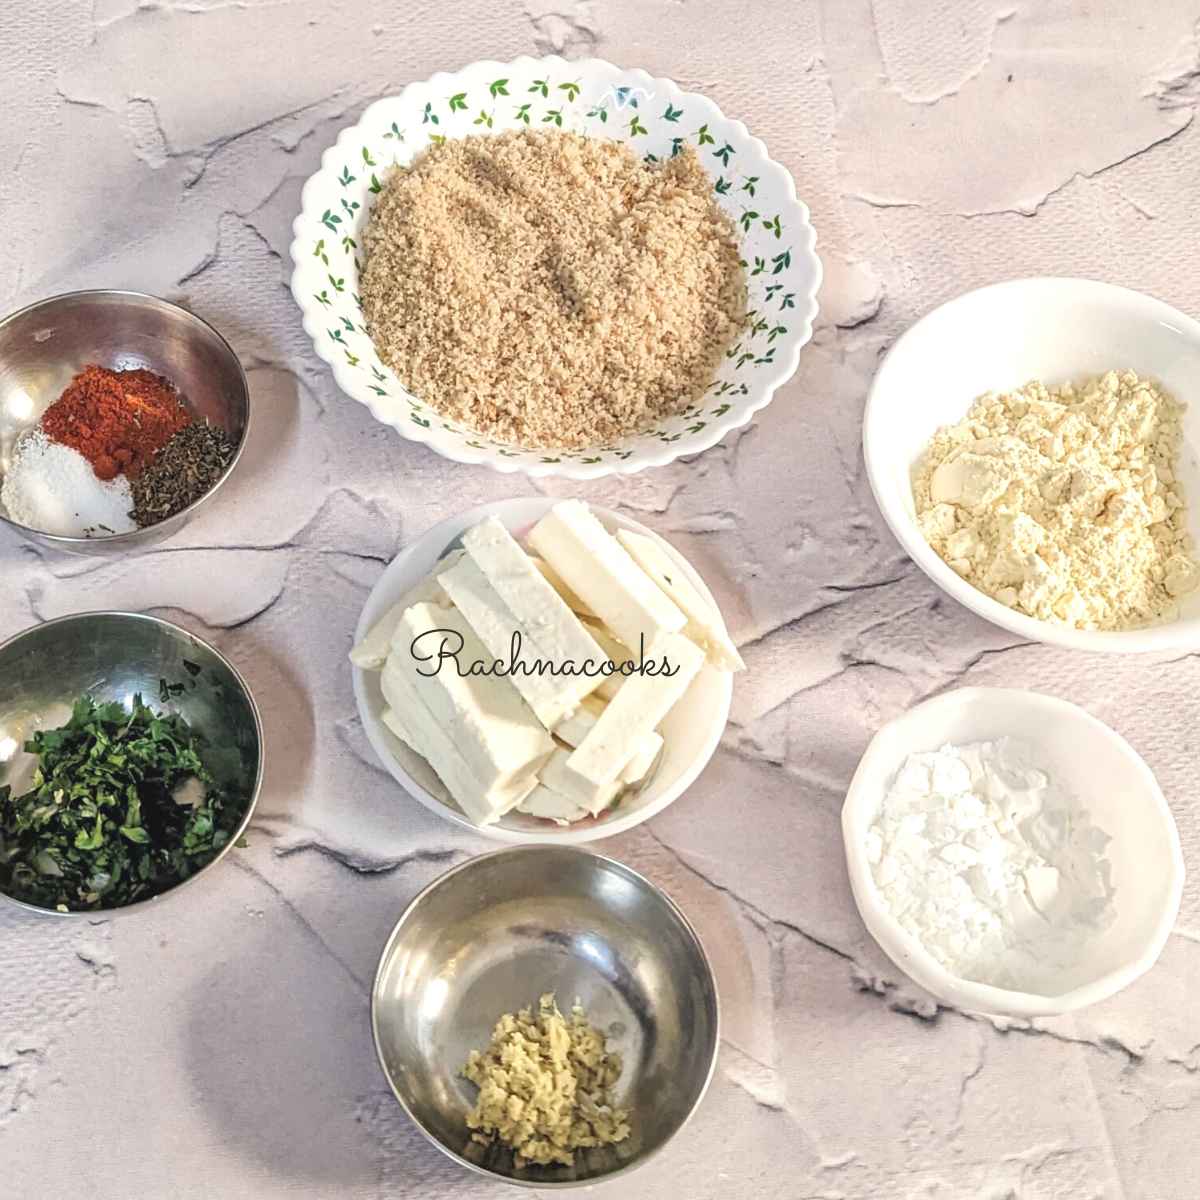 Ingredients for paneer fingers: paneer rectangles, chickpea flour, cornstarch, chopped cilantro, cayenne, Italian seasoning, salt in a bowl, minced ginger in bowls.